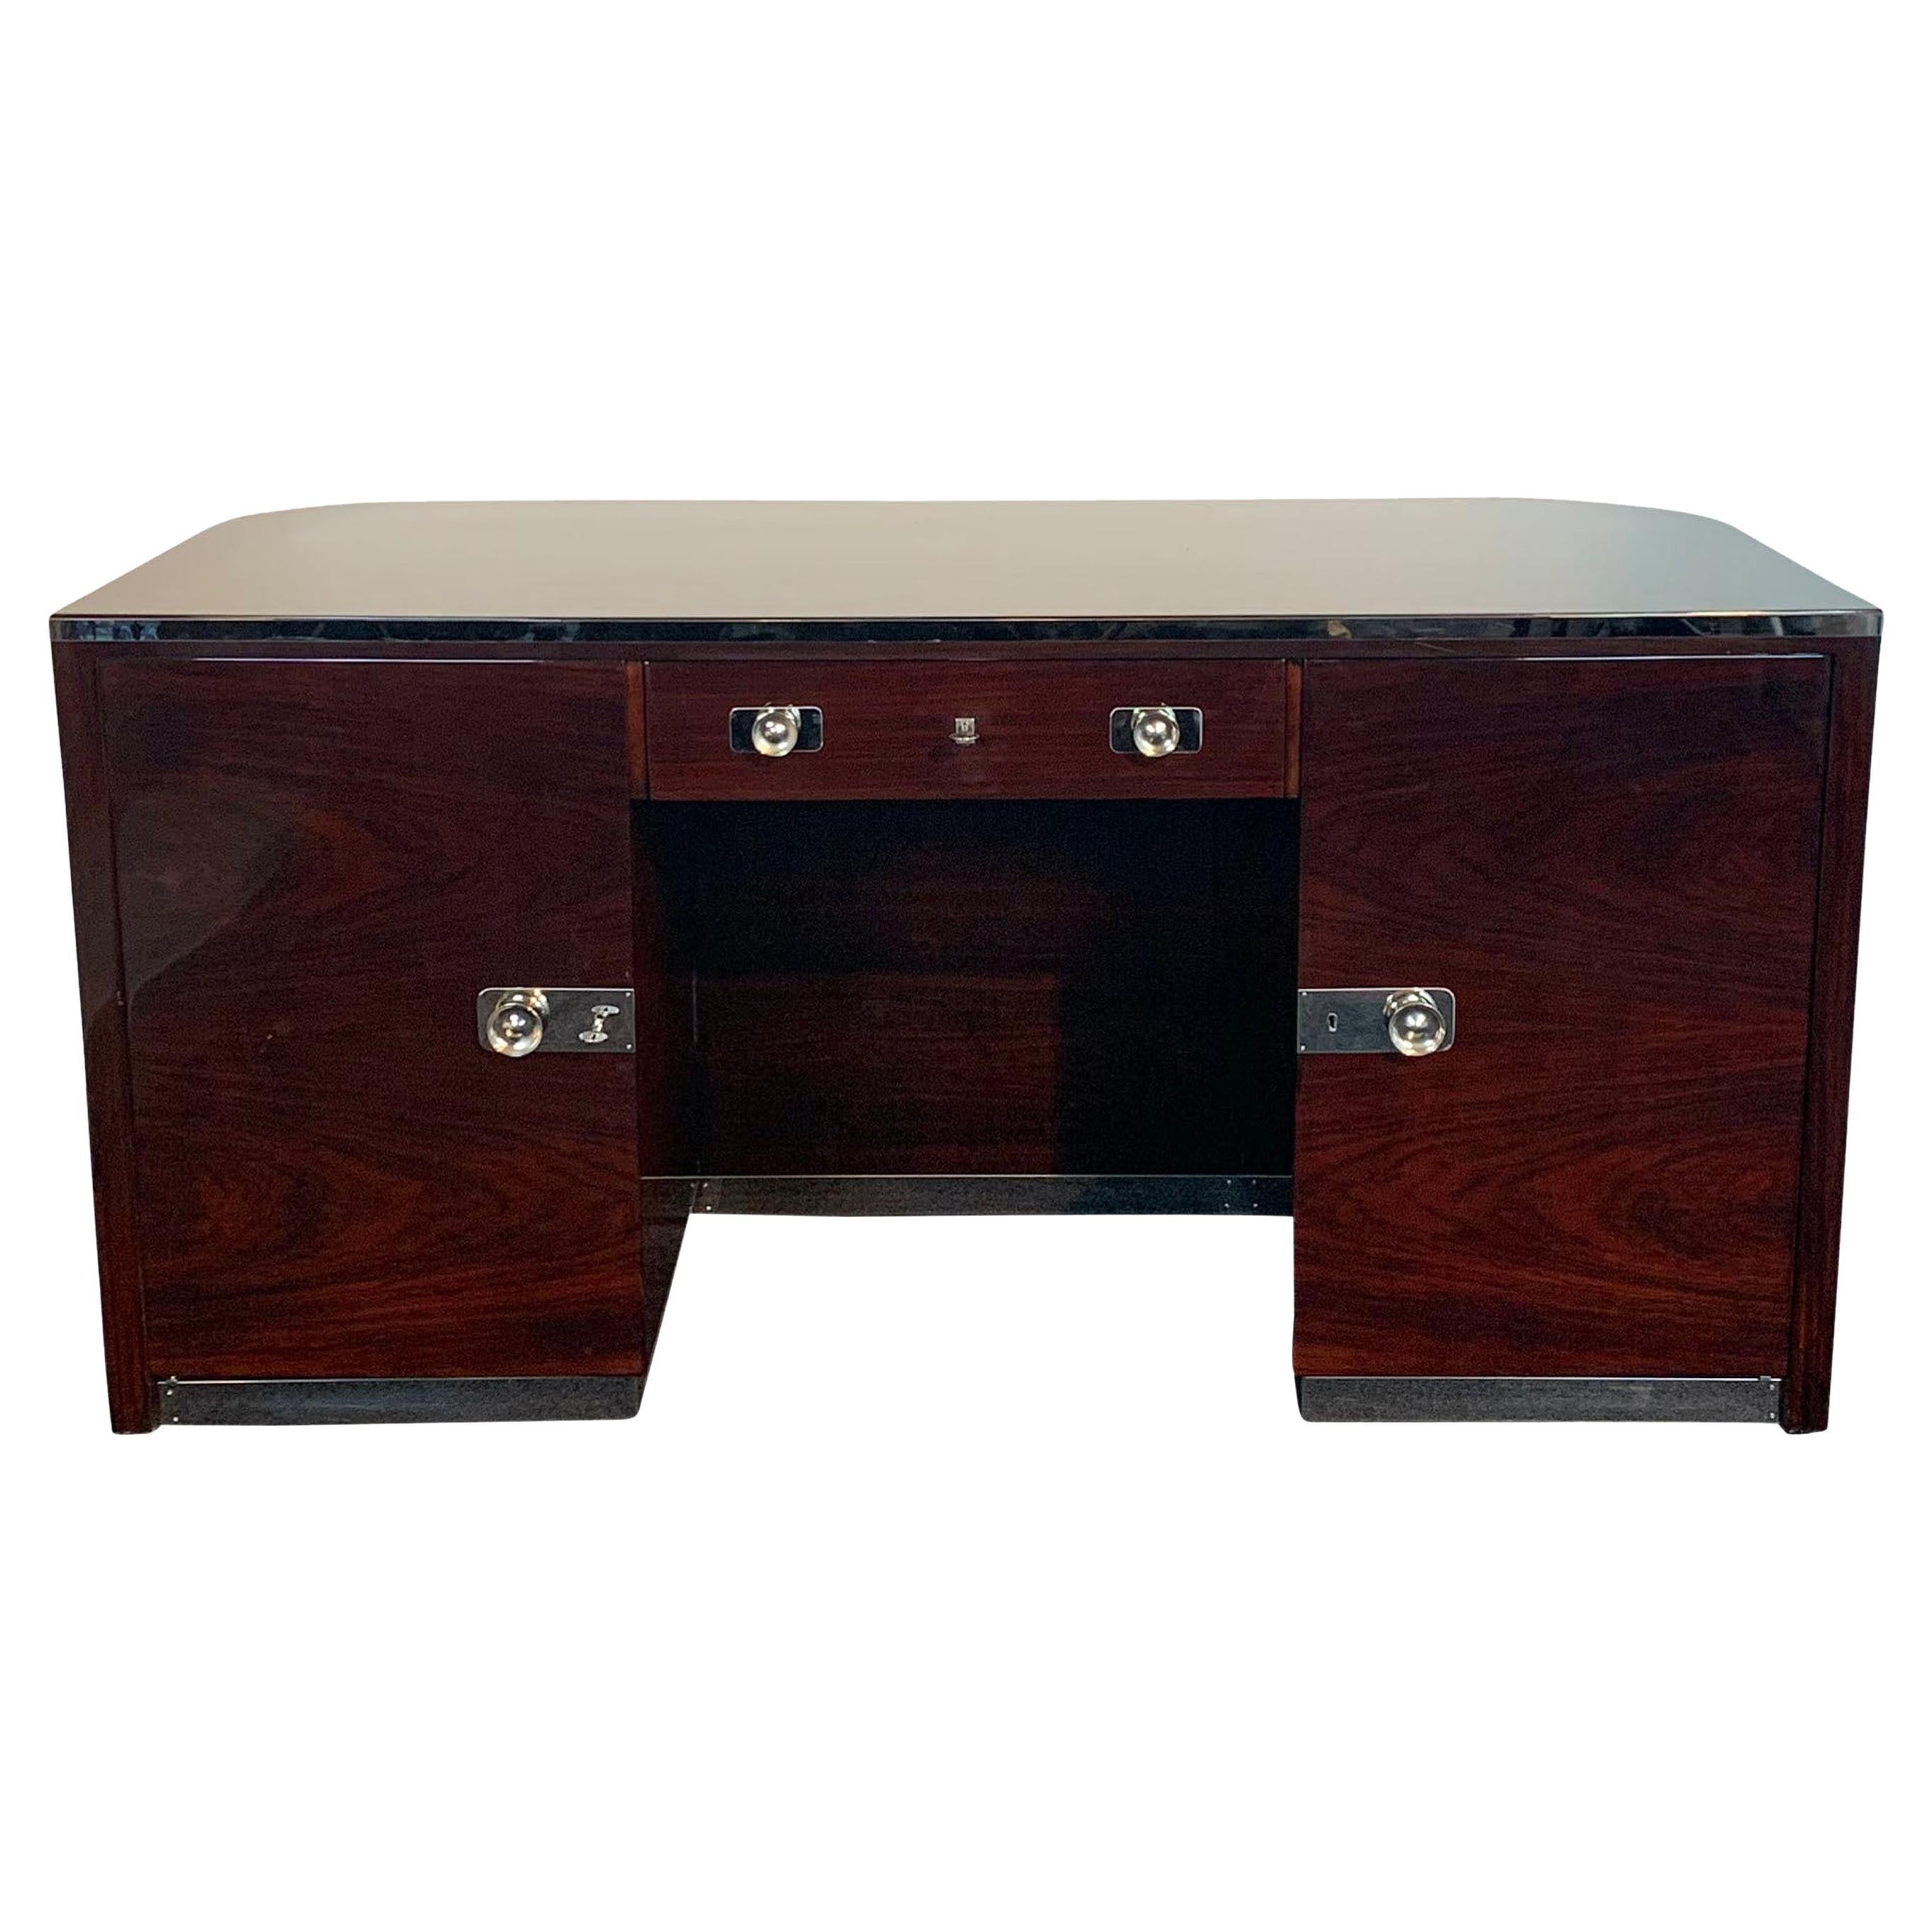 Lacquered Rosewood Desk by Erich Diekmann, Bauhaus, Germany, 1920s For Sale